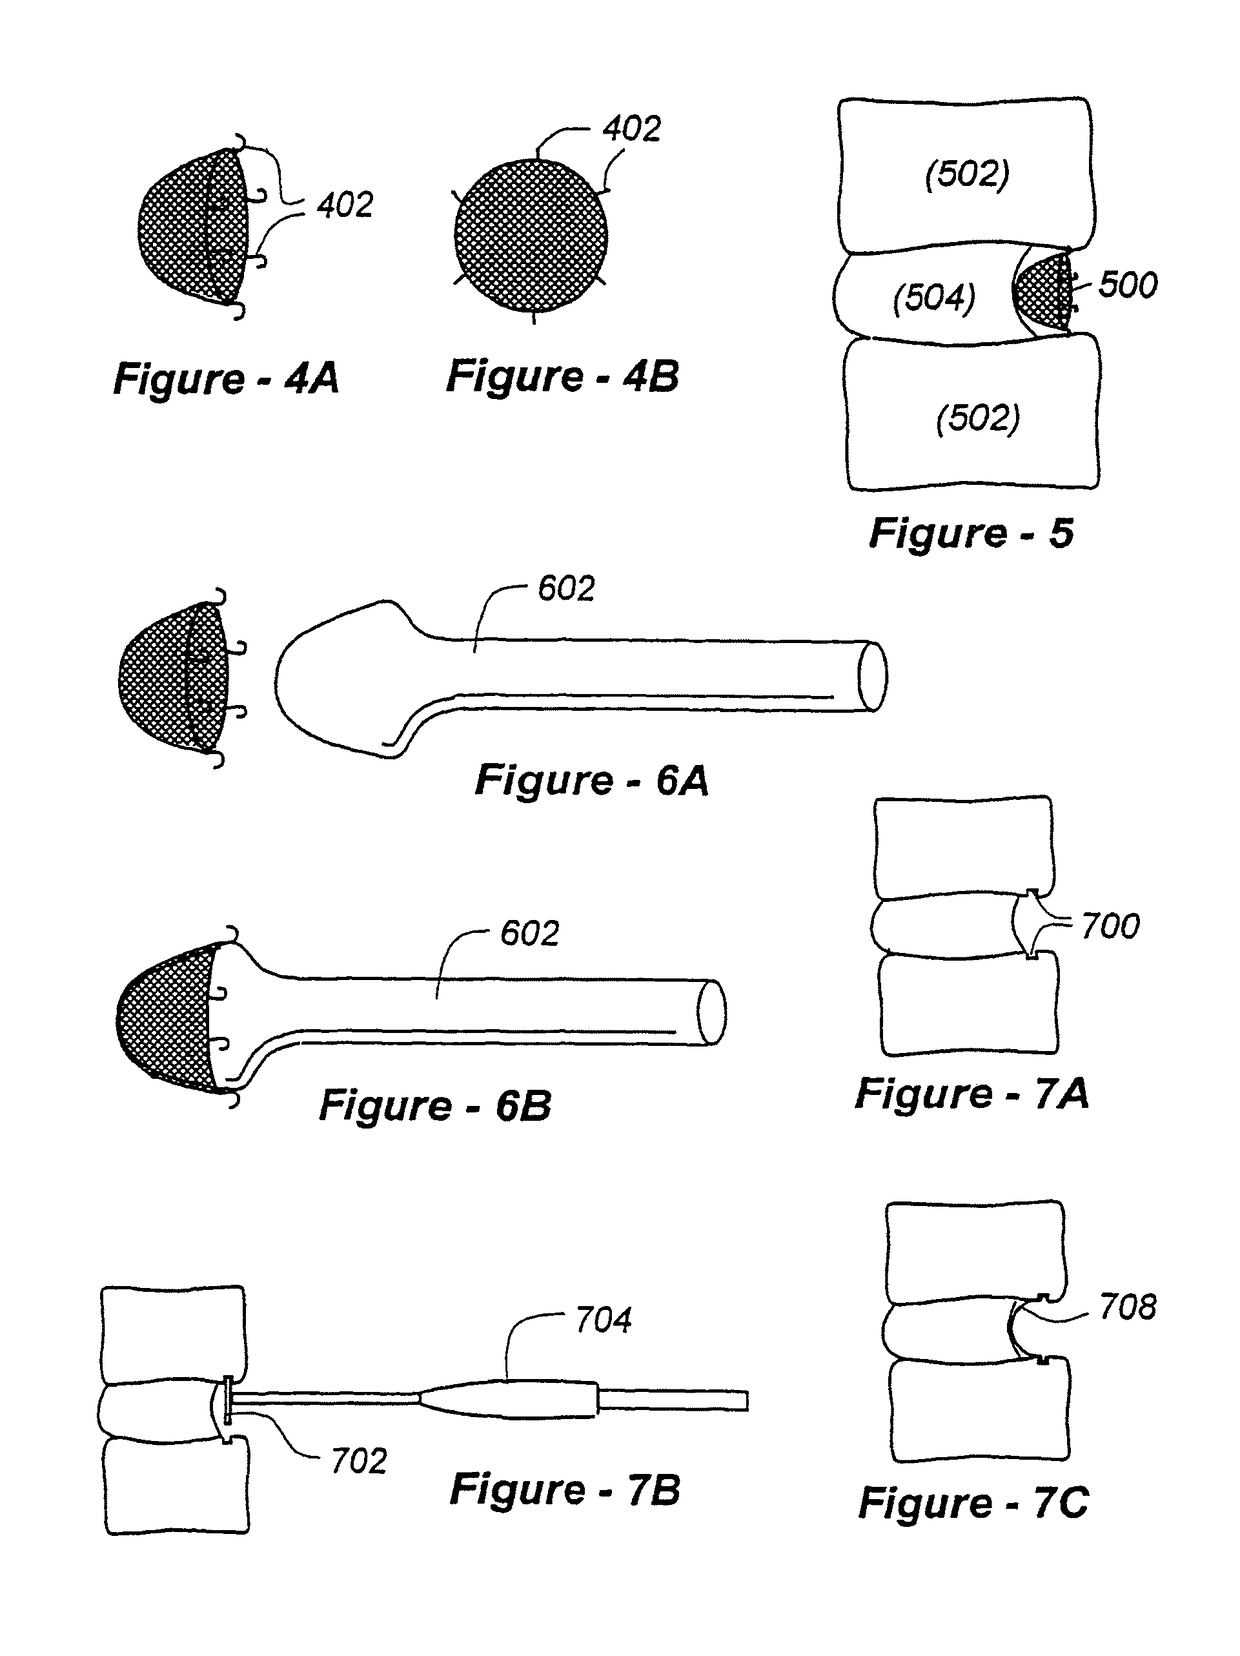 Methods and apparatus for treating disc herniation and preventing the extrusion of interbody bone graft